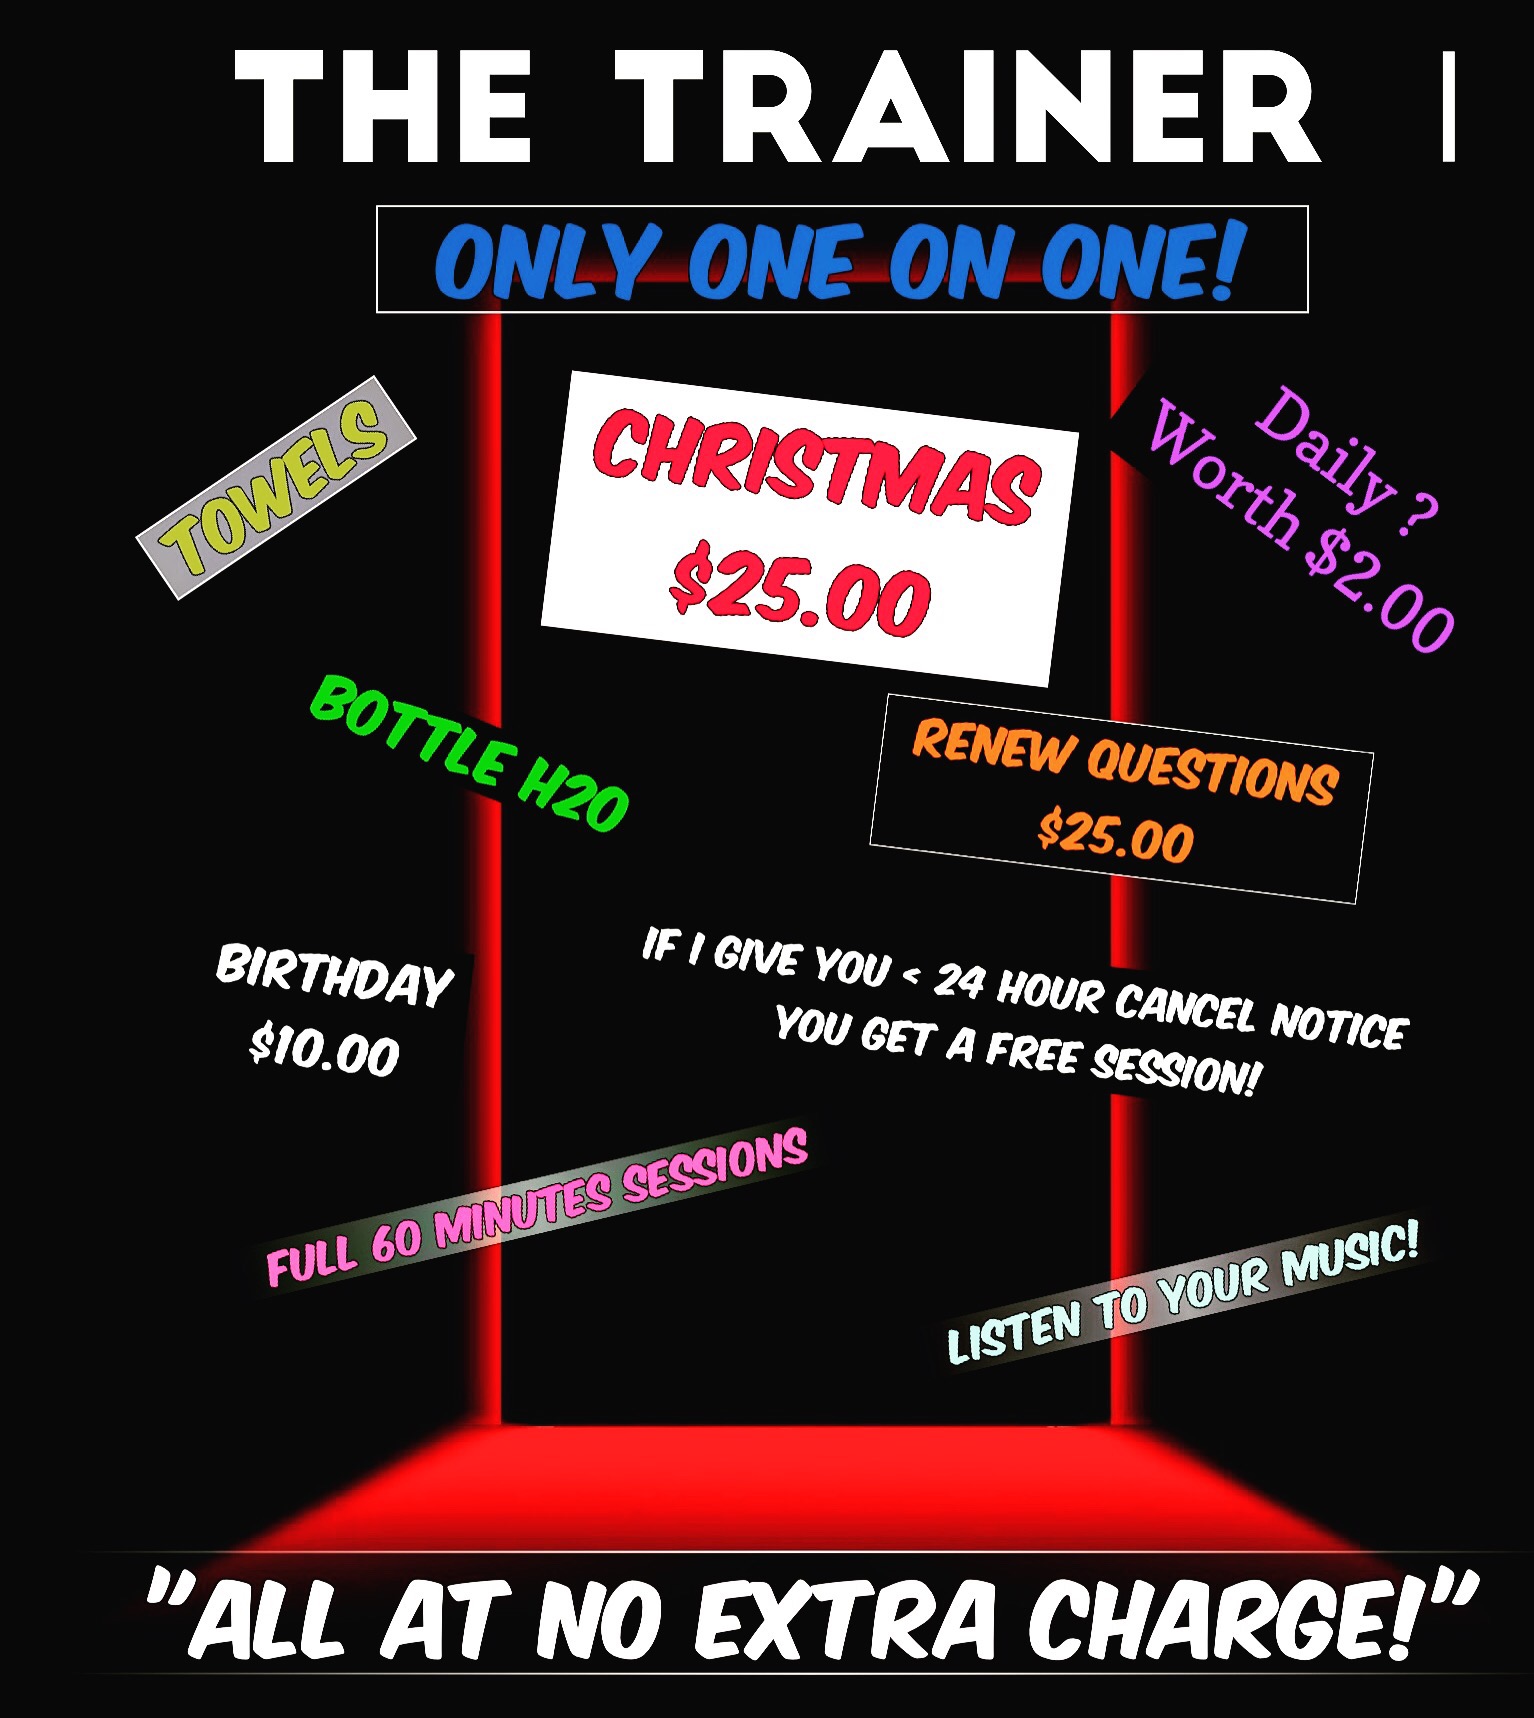 Get this elsewhere? The Trainer